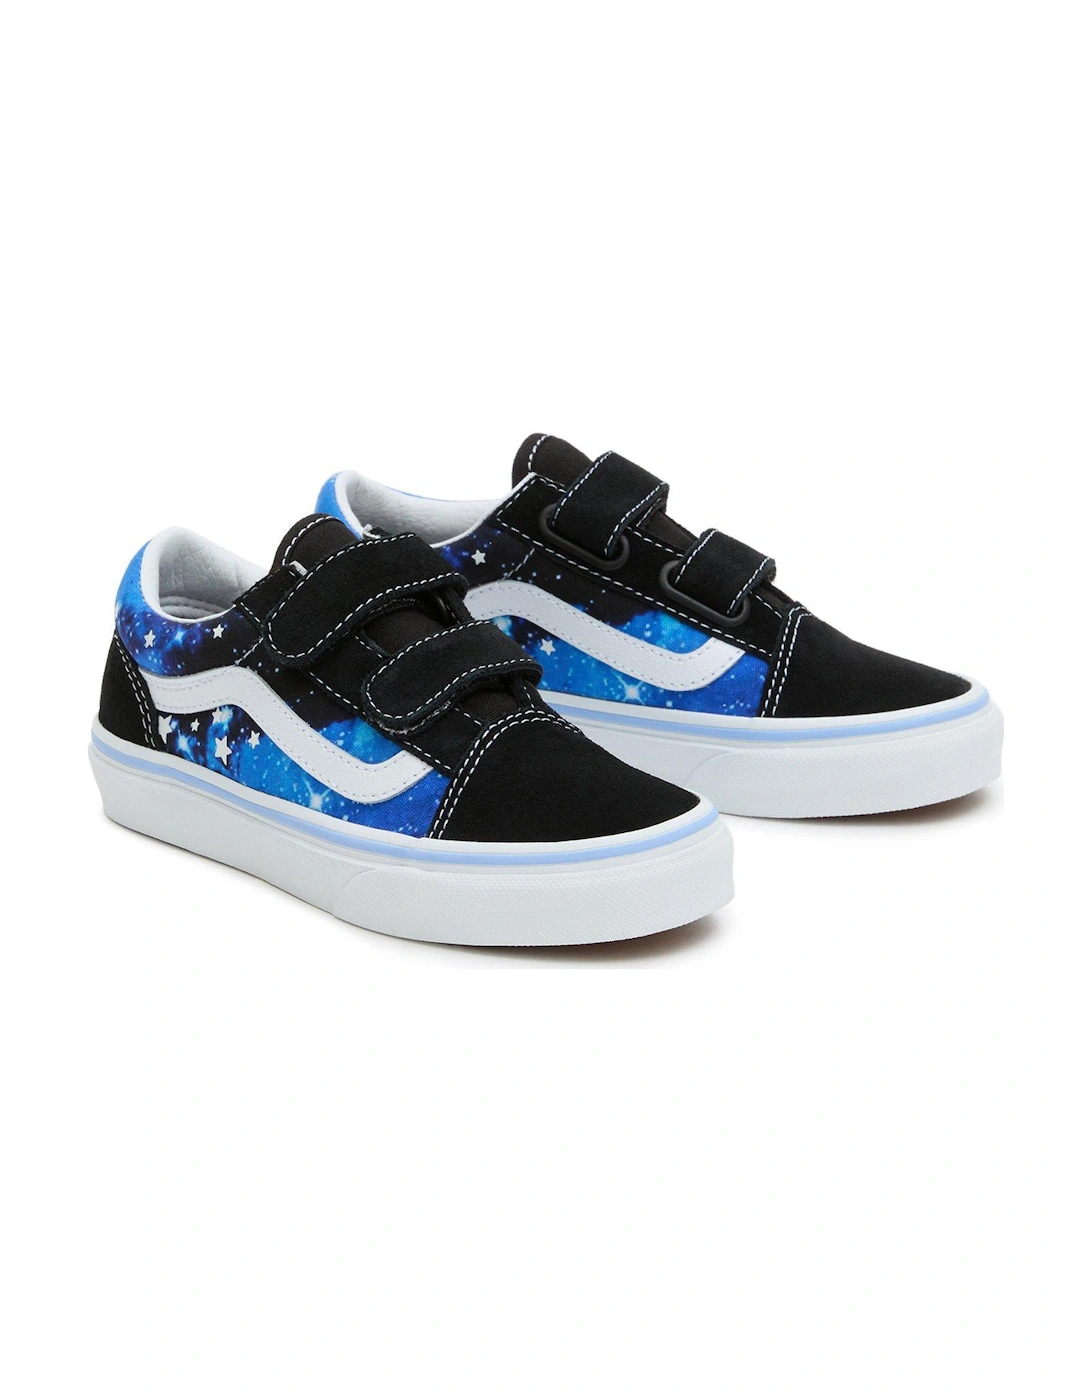 Younger Old Skool Velcro Glow Galaxy Trainers - Blue / Black